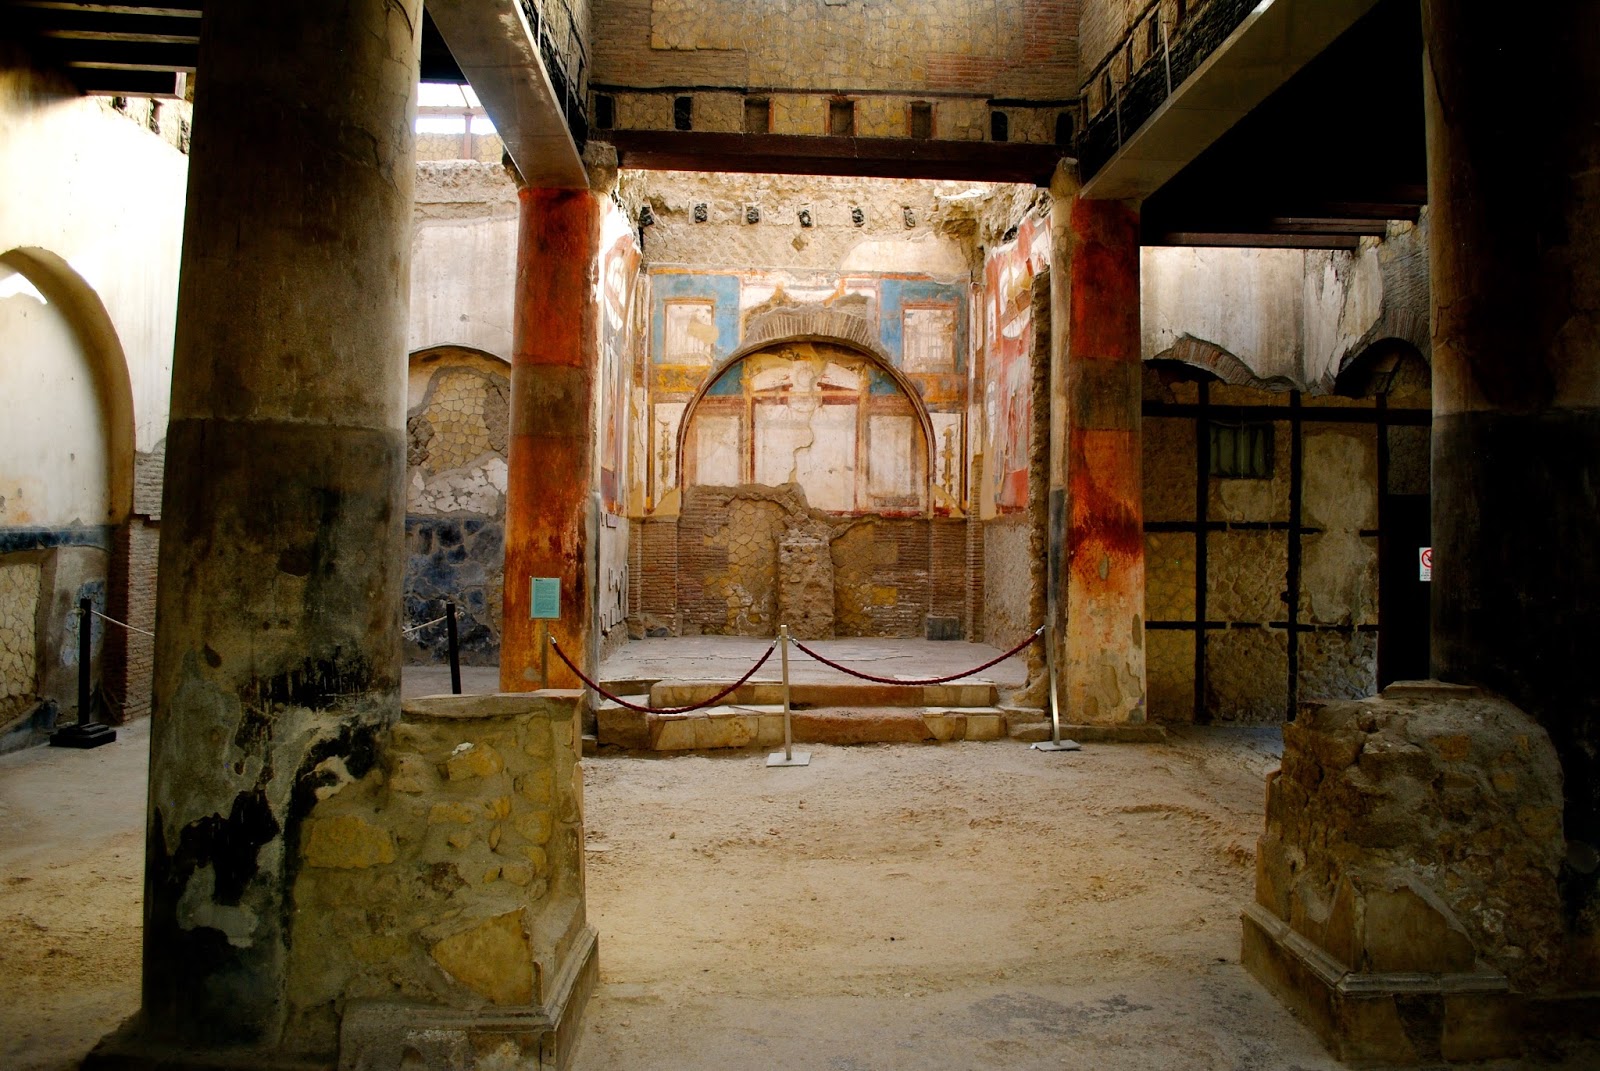 Mosaics and Frescoes in Herculaneum in Italy